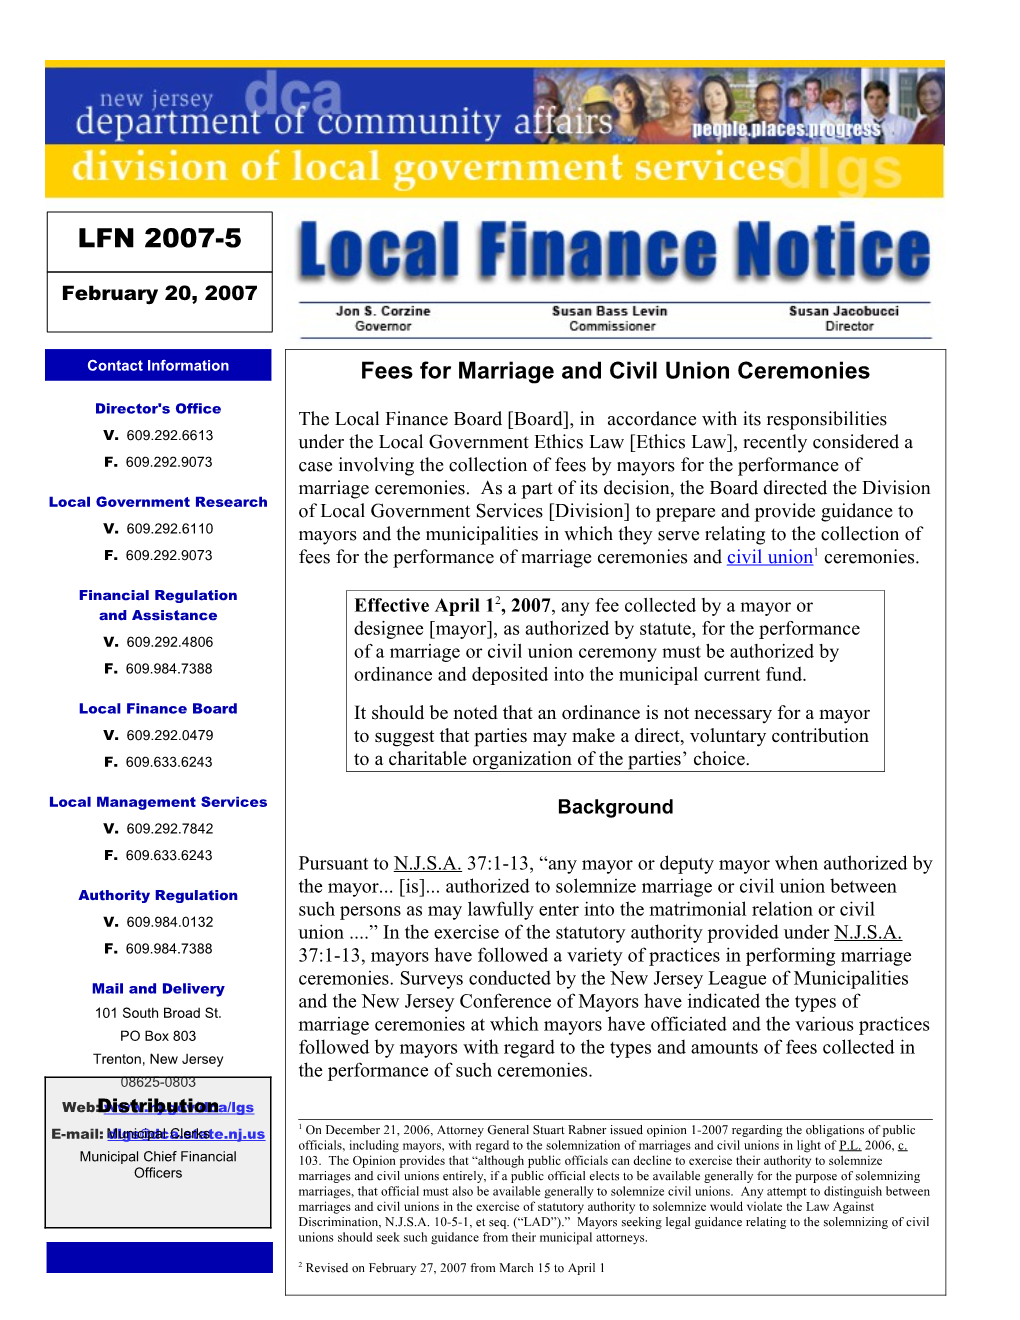 Local Finance Notice 2007-5 February 20, 2007 Page 2